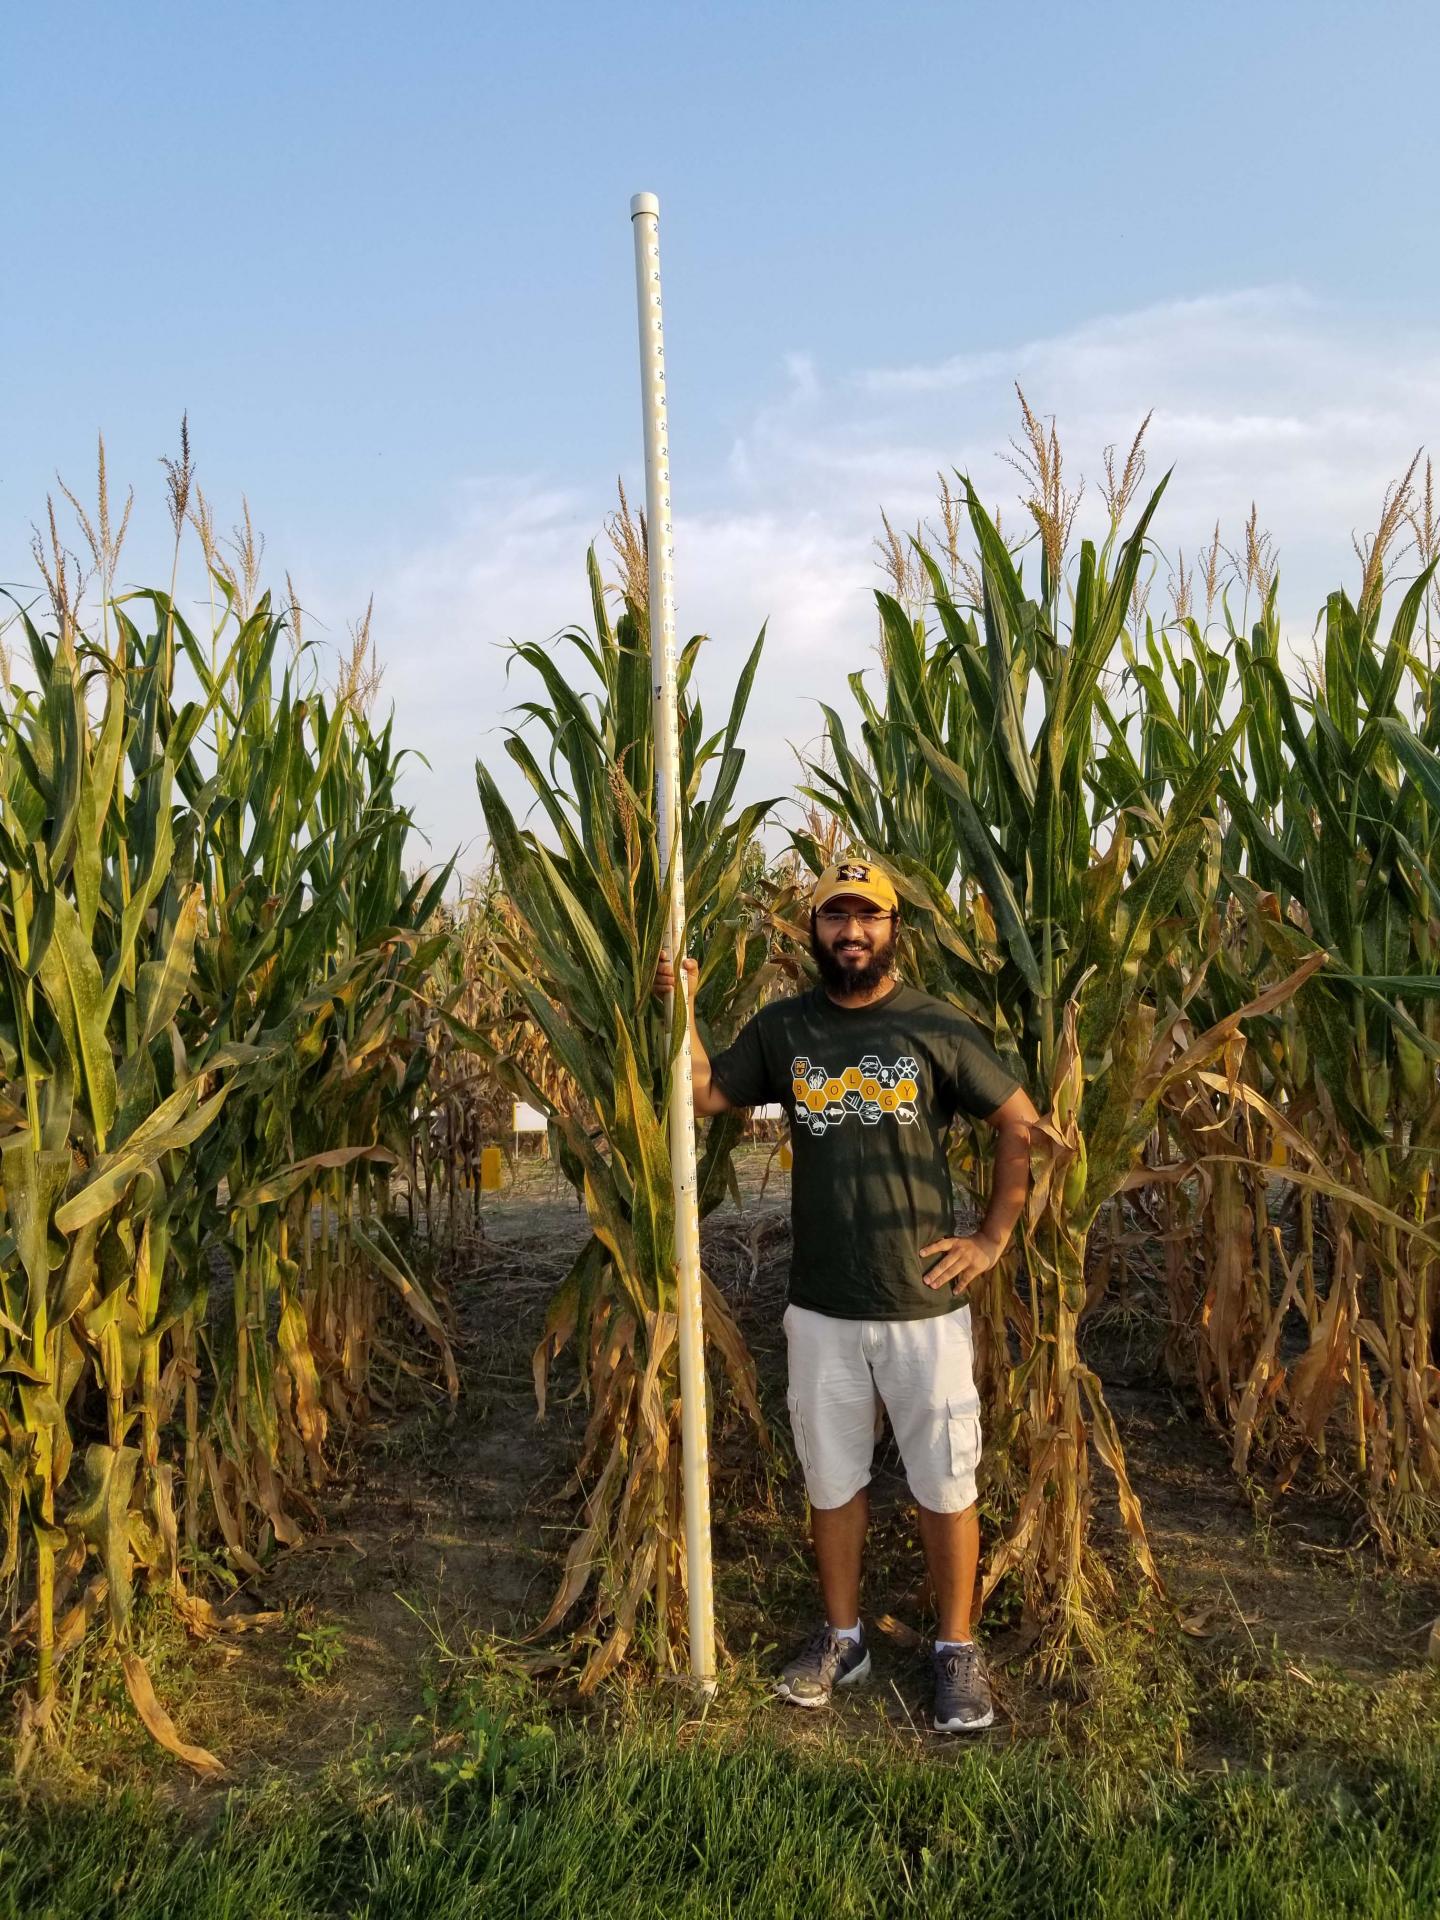 Researcher Measuring the Height of Corn